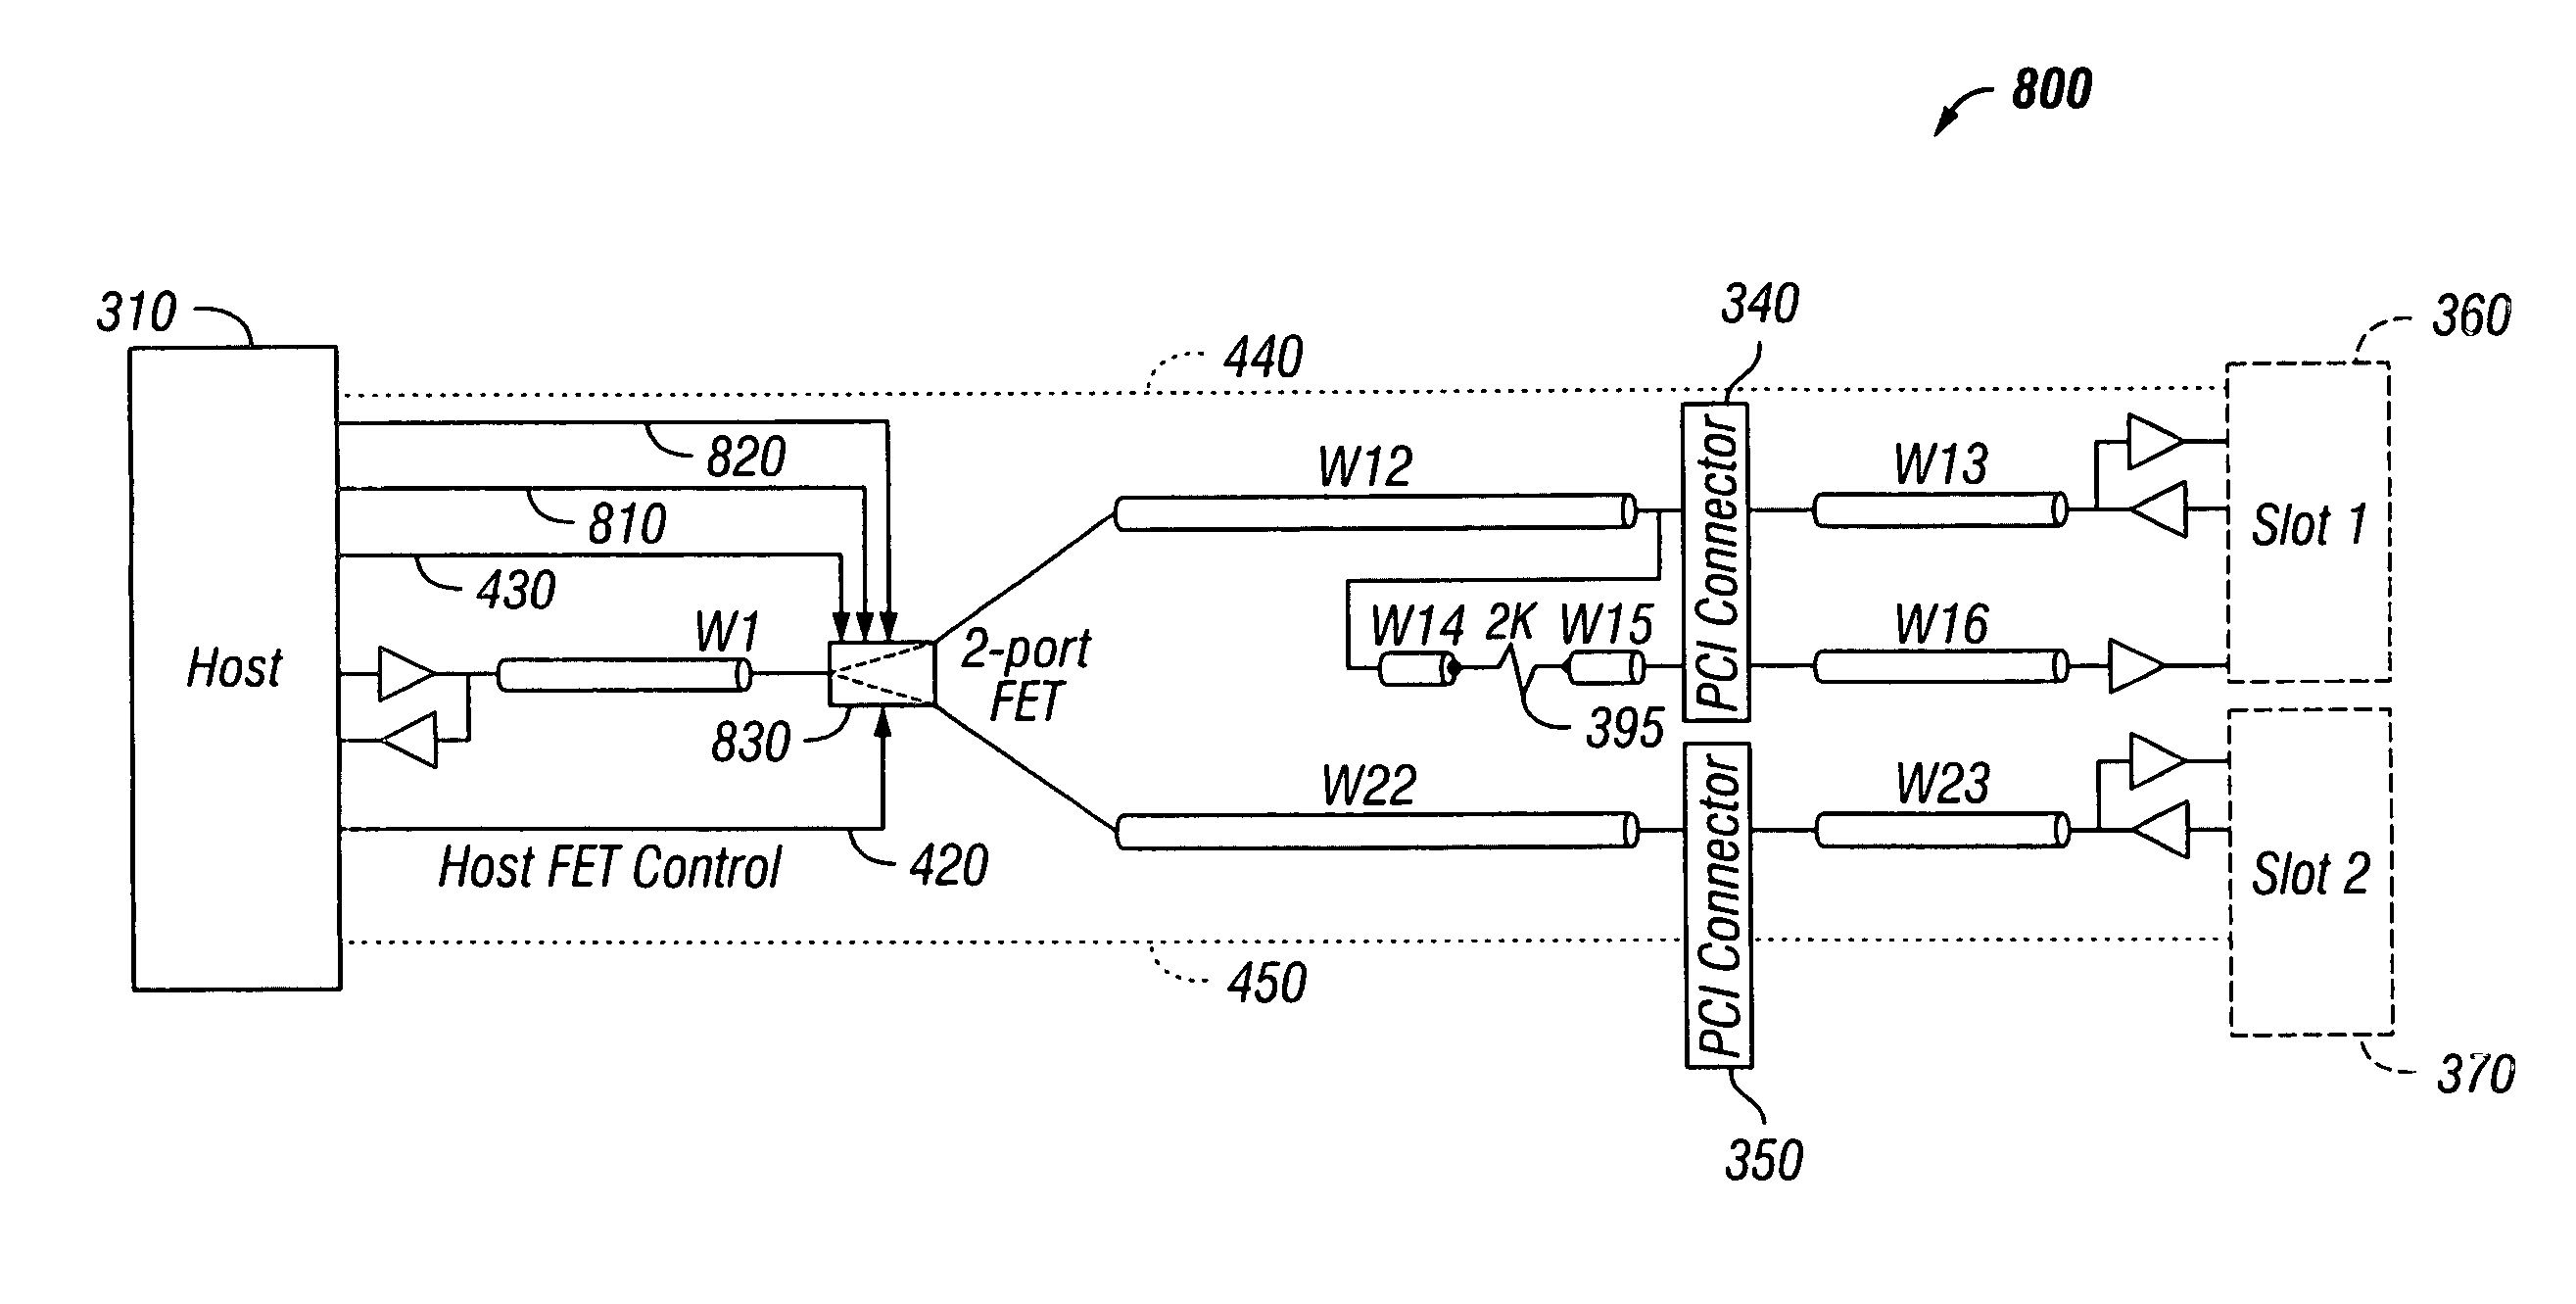 Point-to-point electrical loading for a multi-drop bus